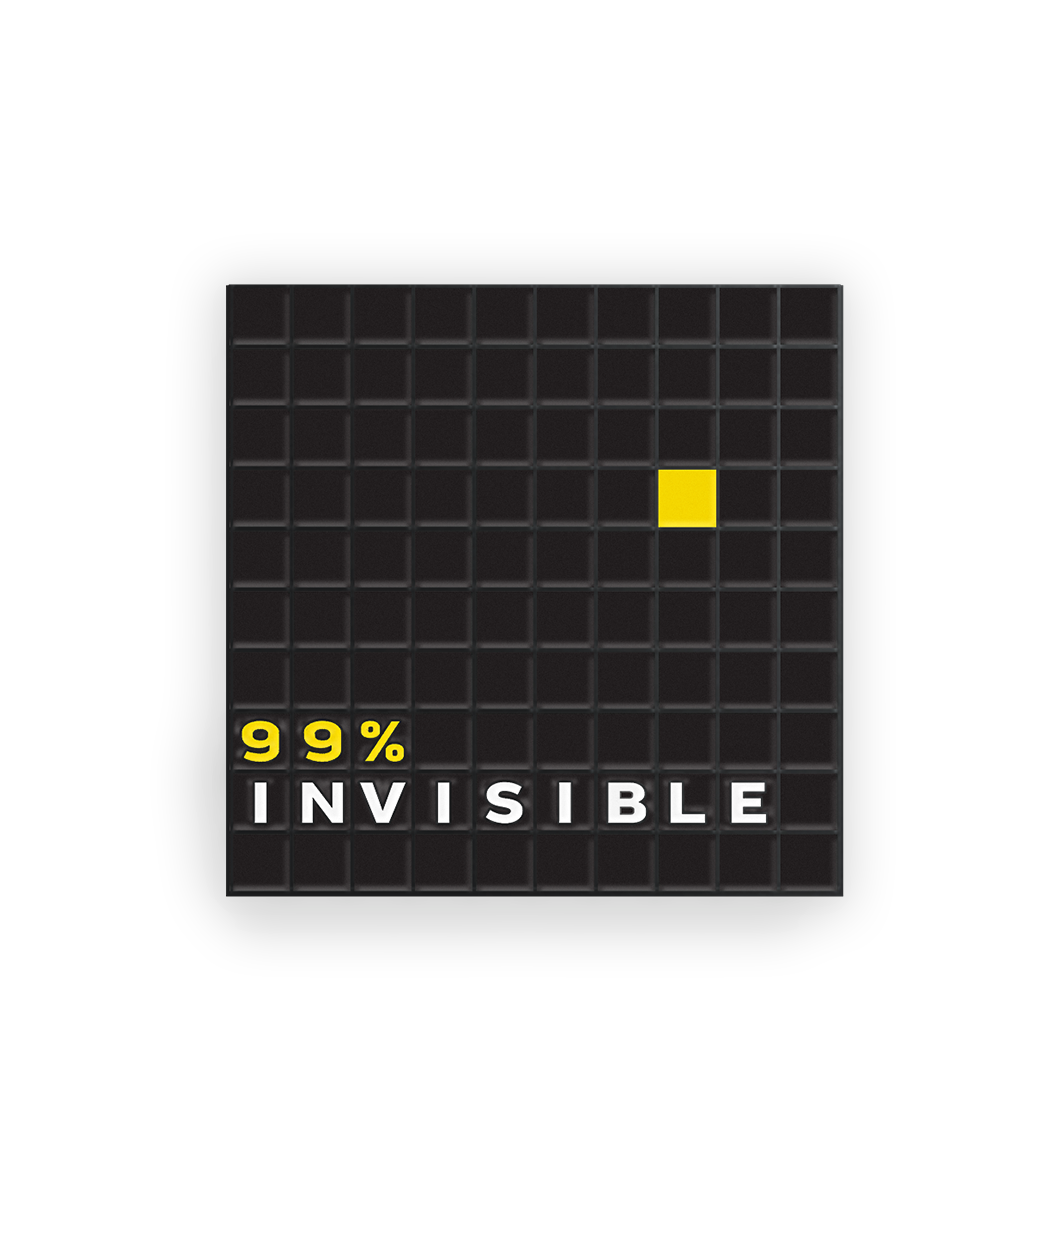 Square pin split into a grid of all black squares except for 1 yellow square. Includes white and yellow words 